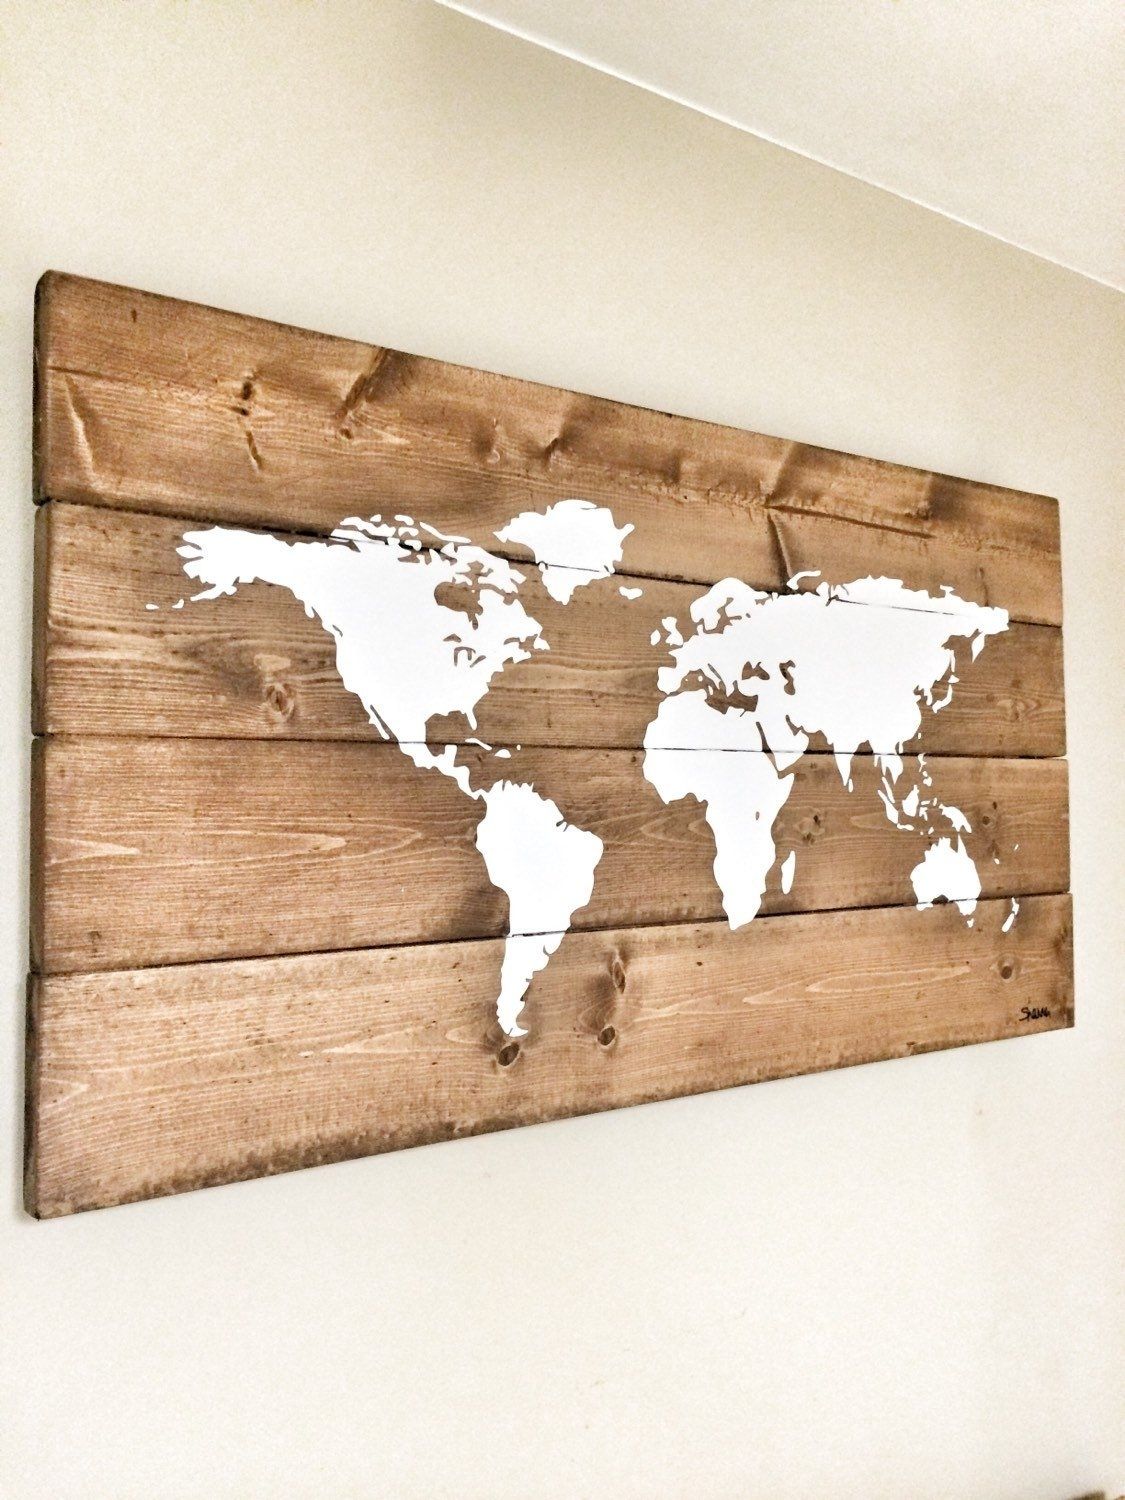 Rustic Wood World Map, Rustic Decor, Farmhouse Decor, Rustic Nursery Within Wooden World Map Wall Art (View 10 of 20)